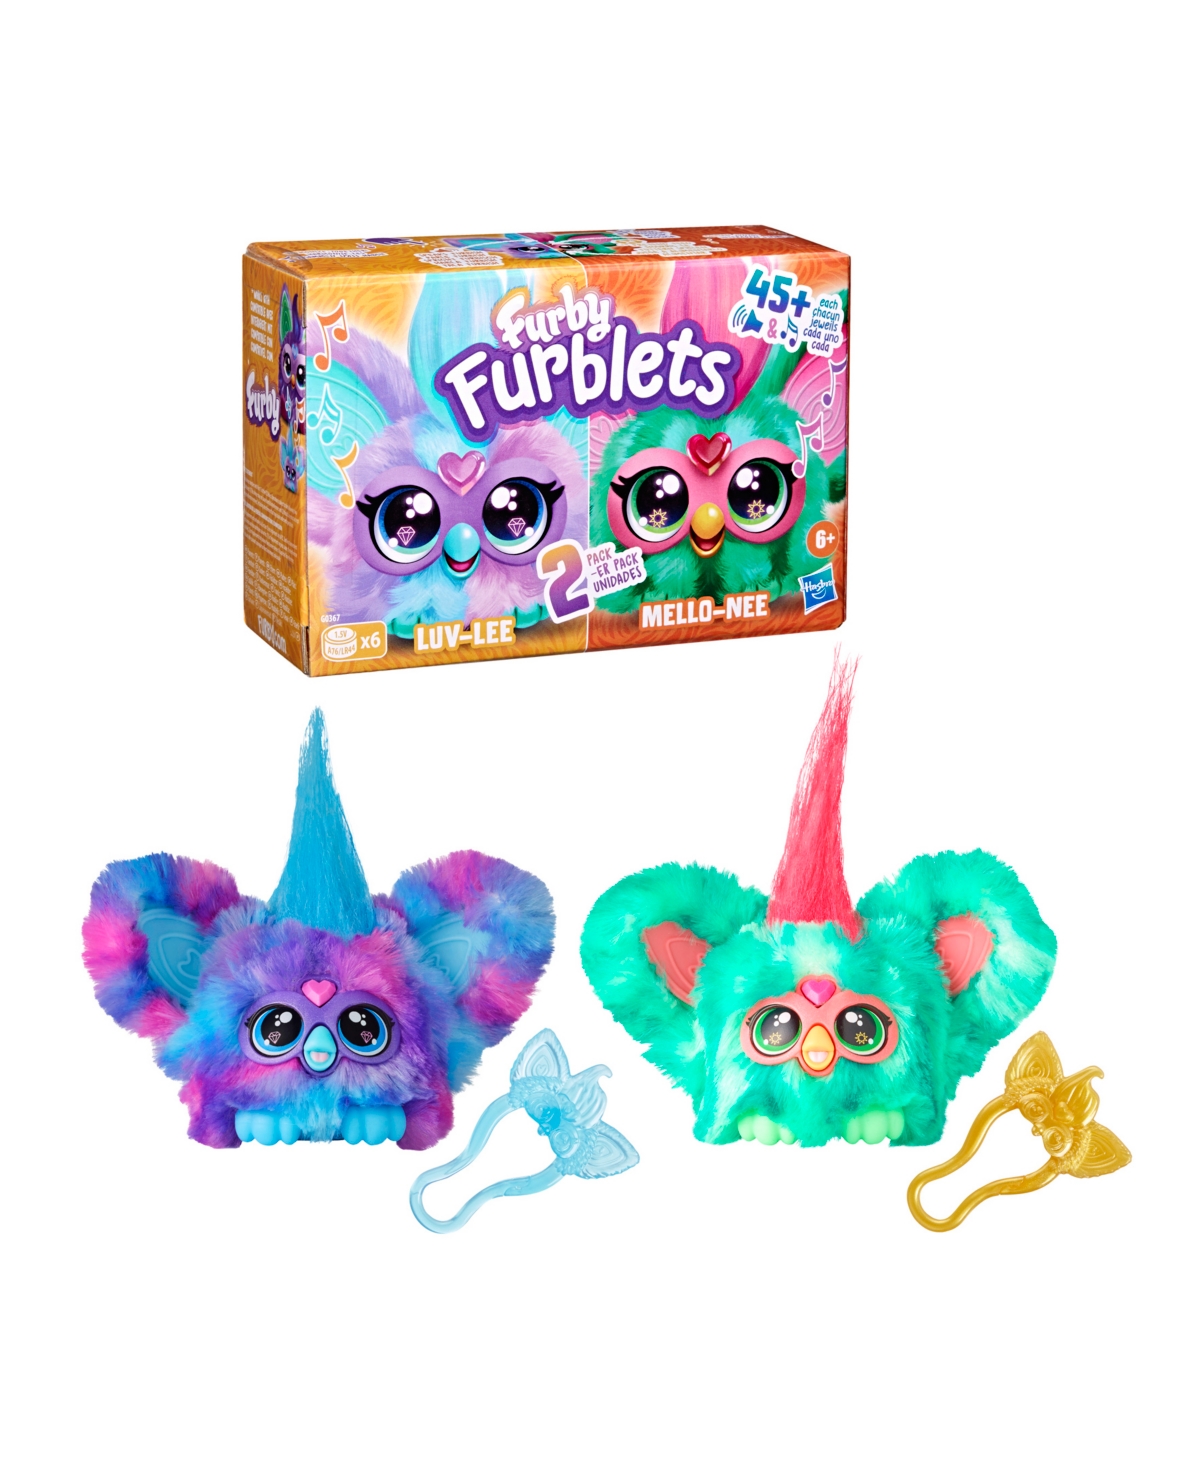 Shop Furby Furblets Luv-lee Mello-nee 2-pack Mini Electronic Plush Toy For Girls In No Color